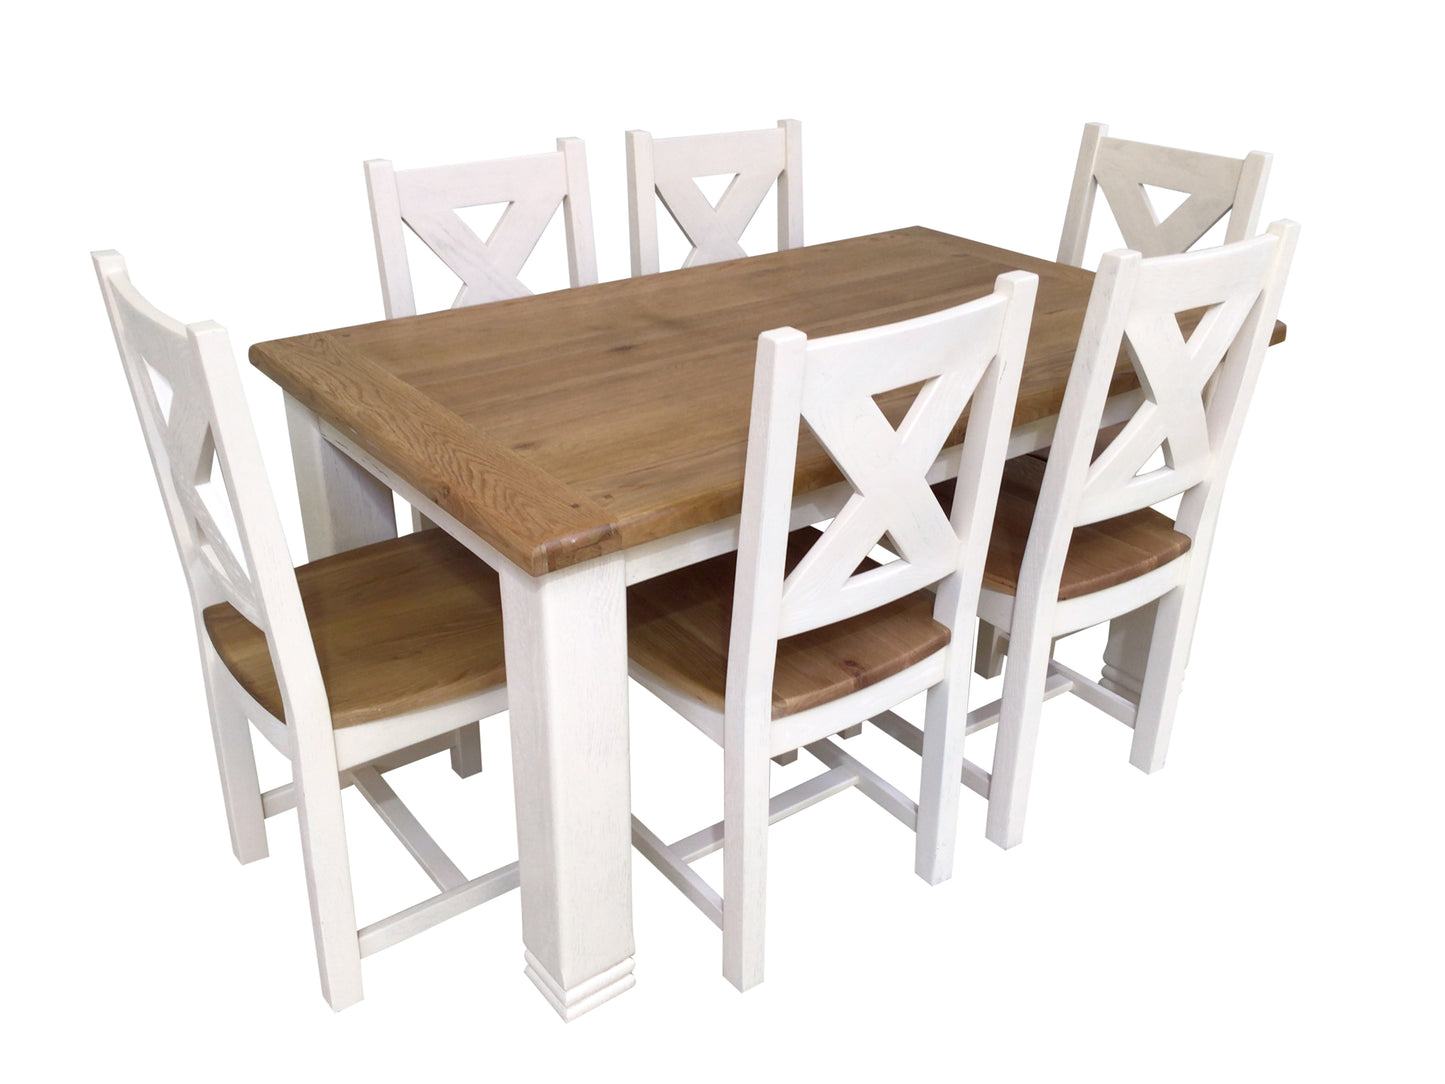 Danube Oak 1.5m Fixed Top Dining Set painted Off-White